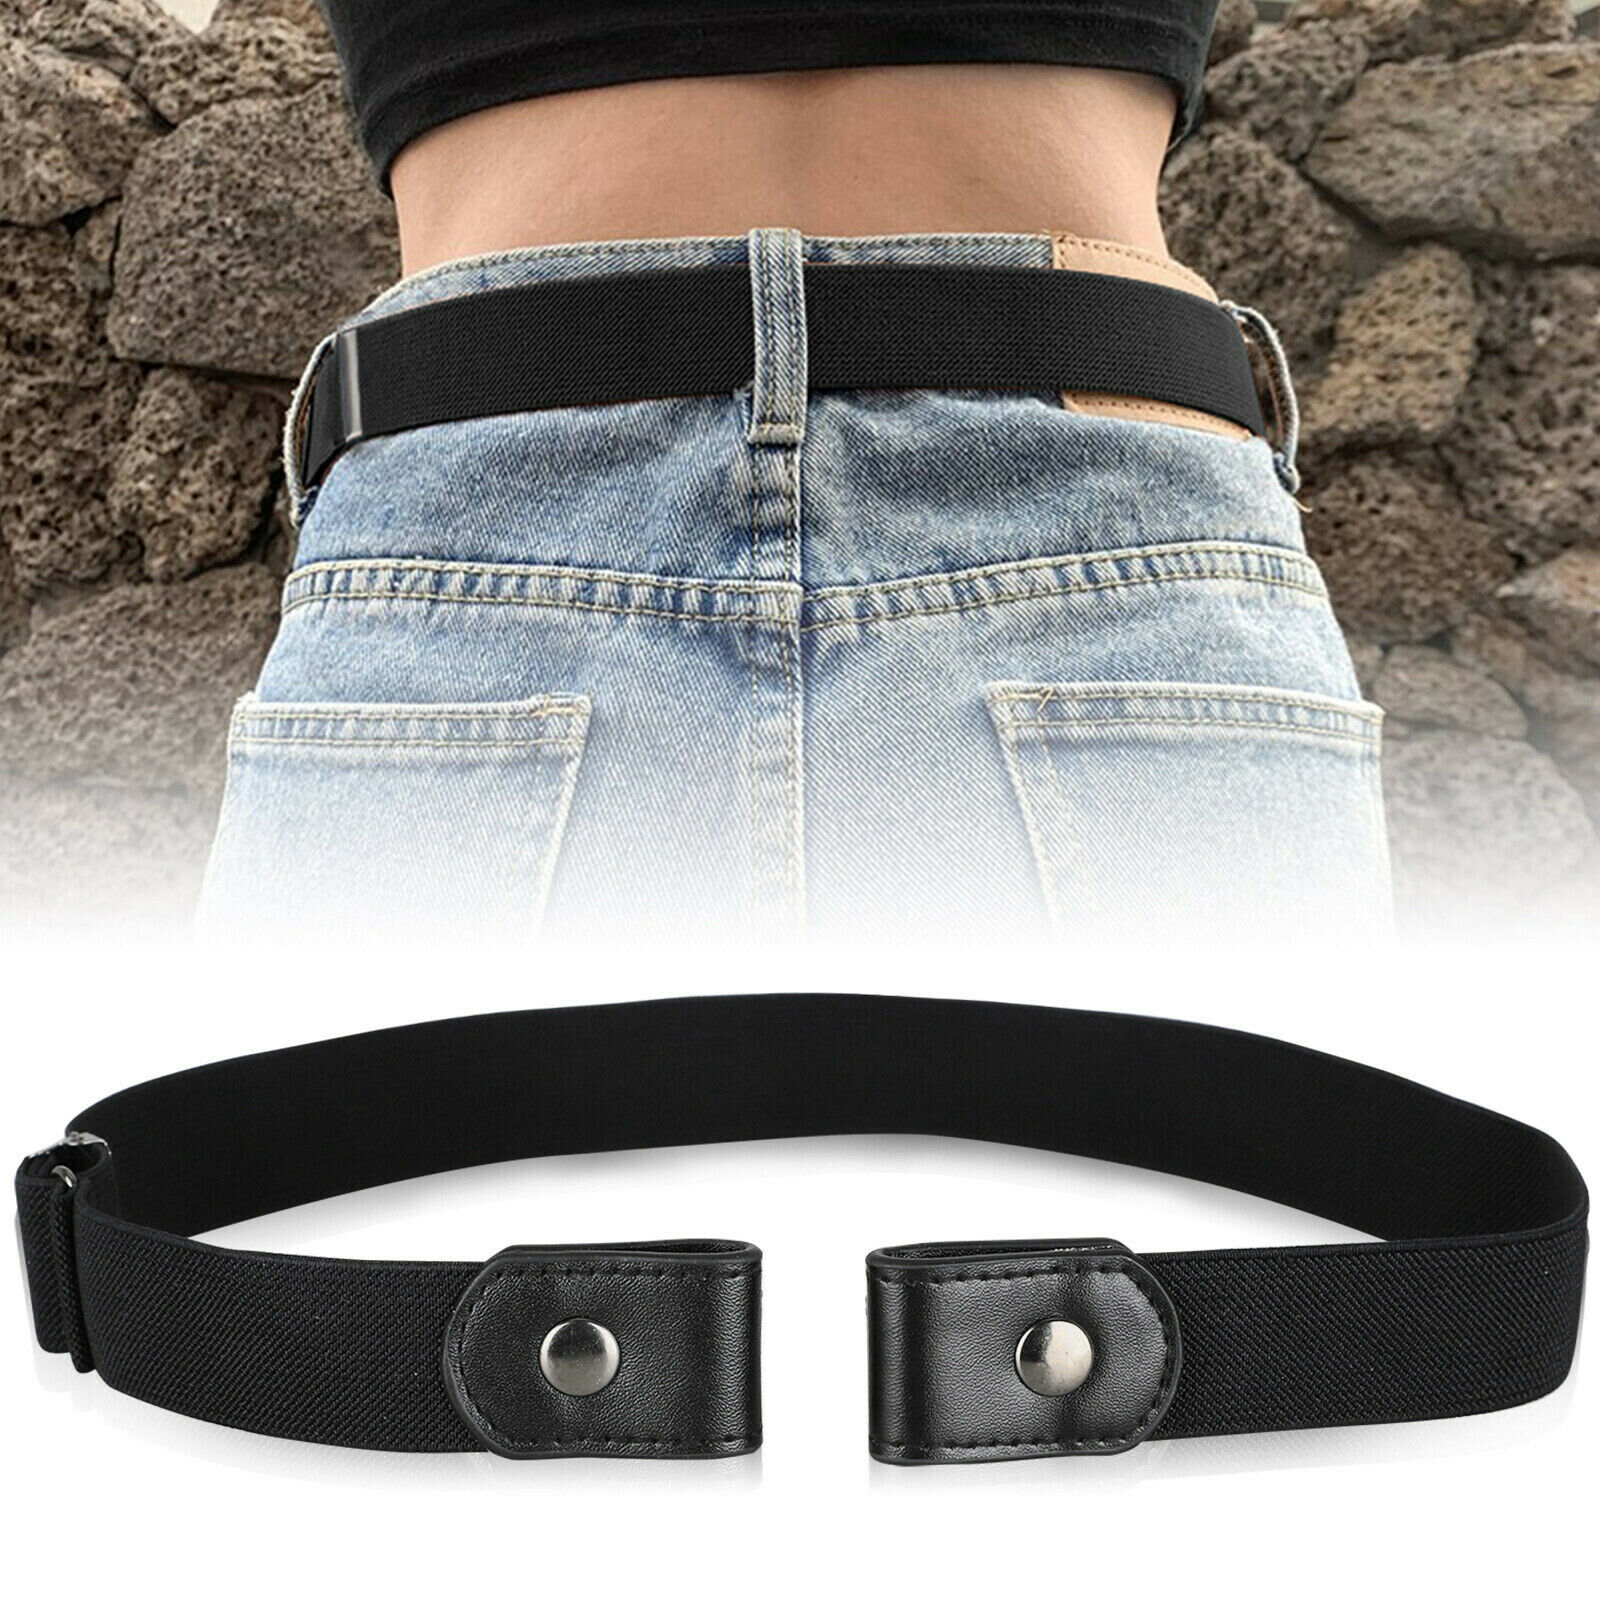 Buckle-free Elastic Invisible Waist Belt For Jeans No Bulge Hassle Men Women New